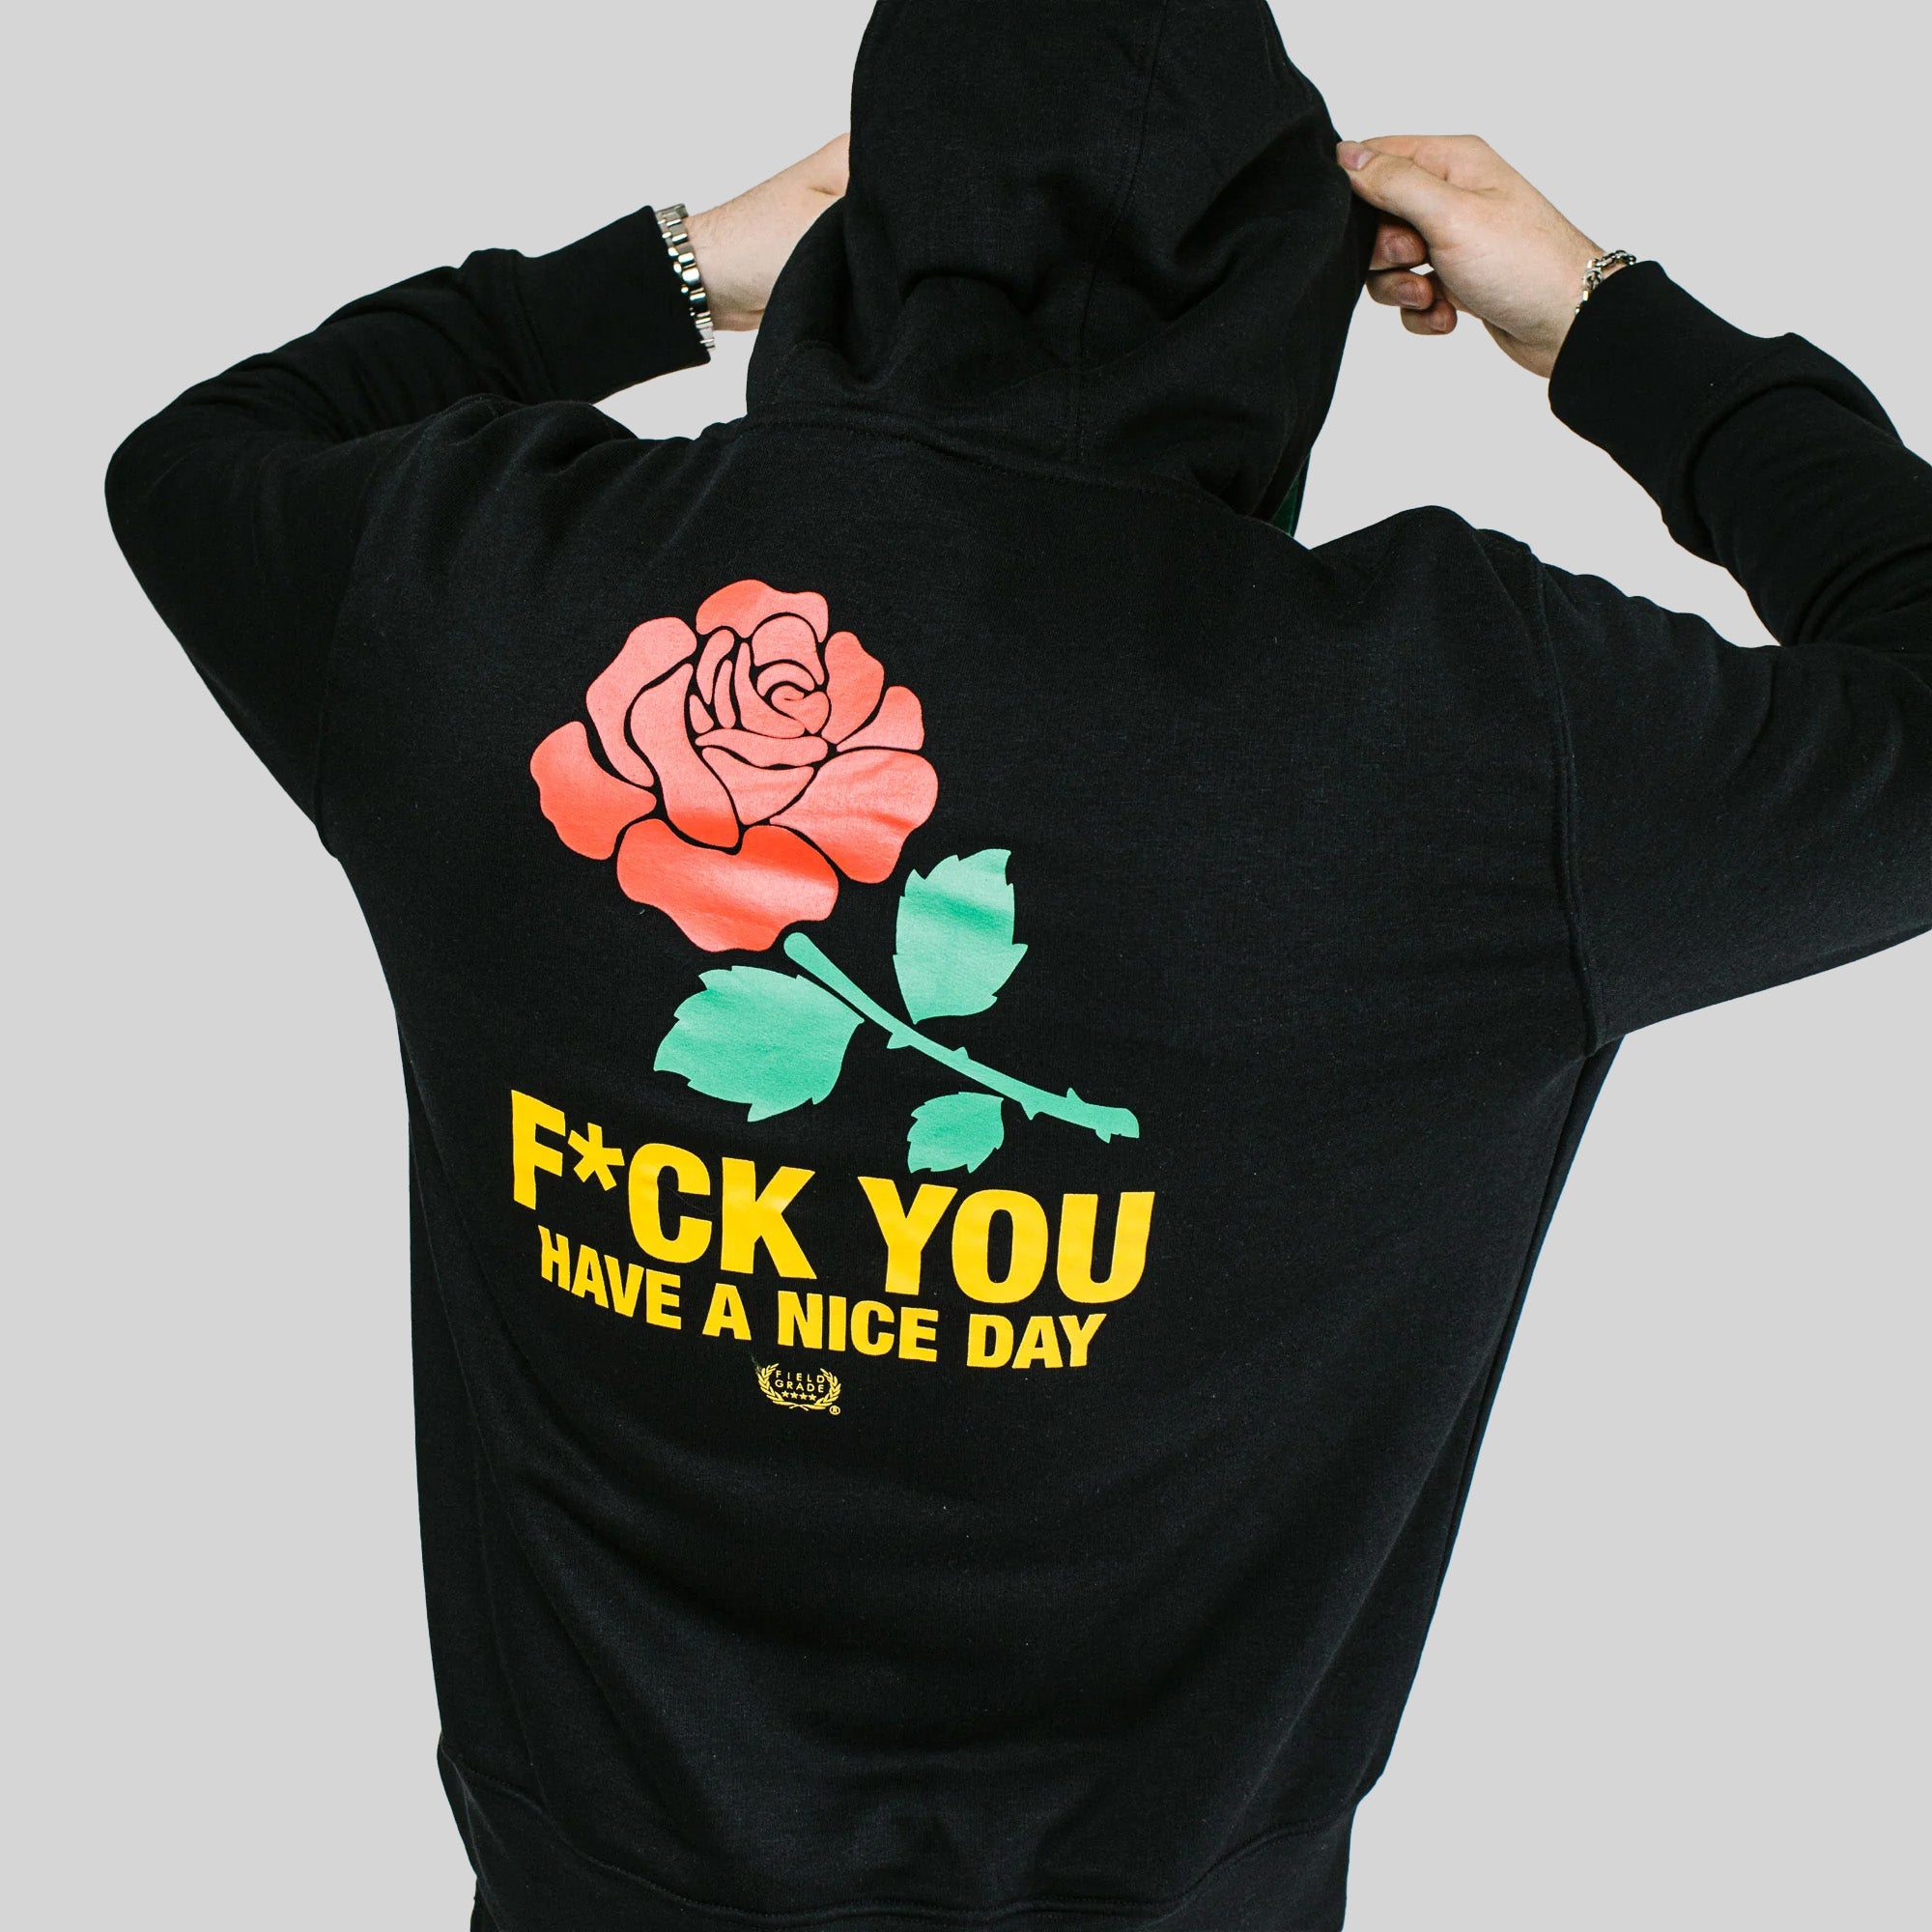 HAVE A NICE DAY HOODIE